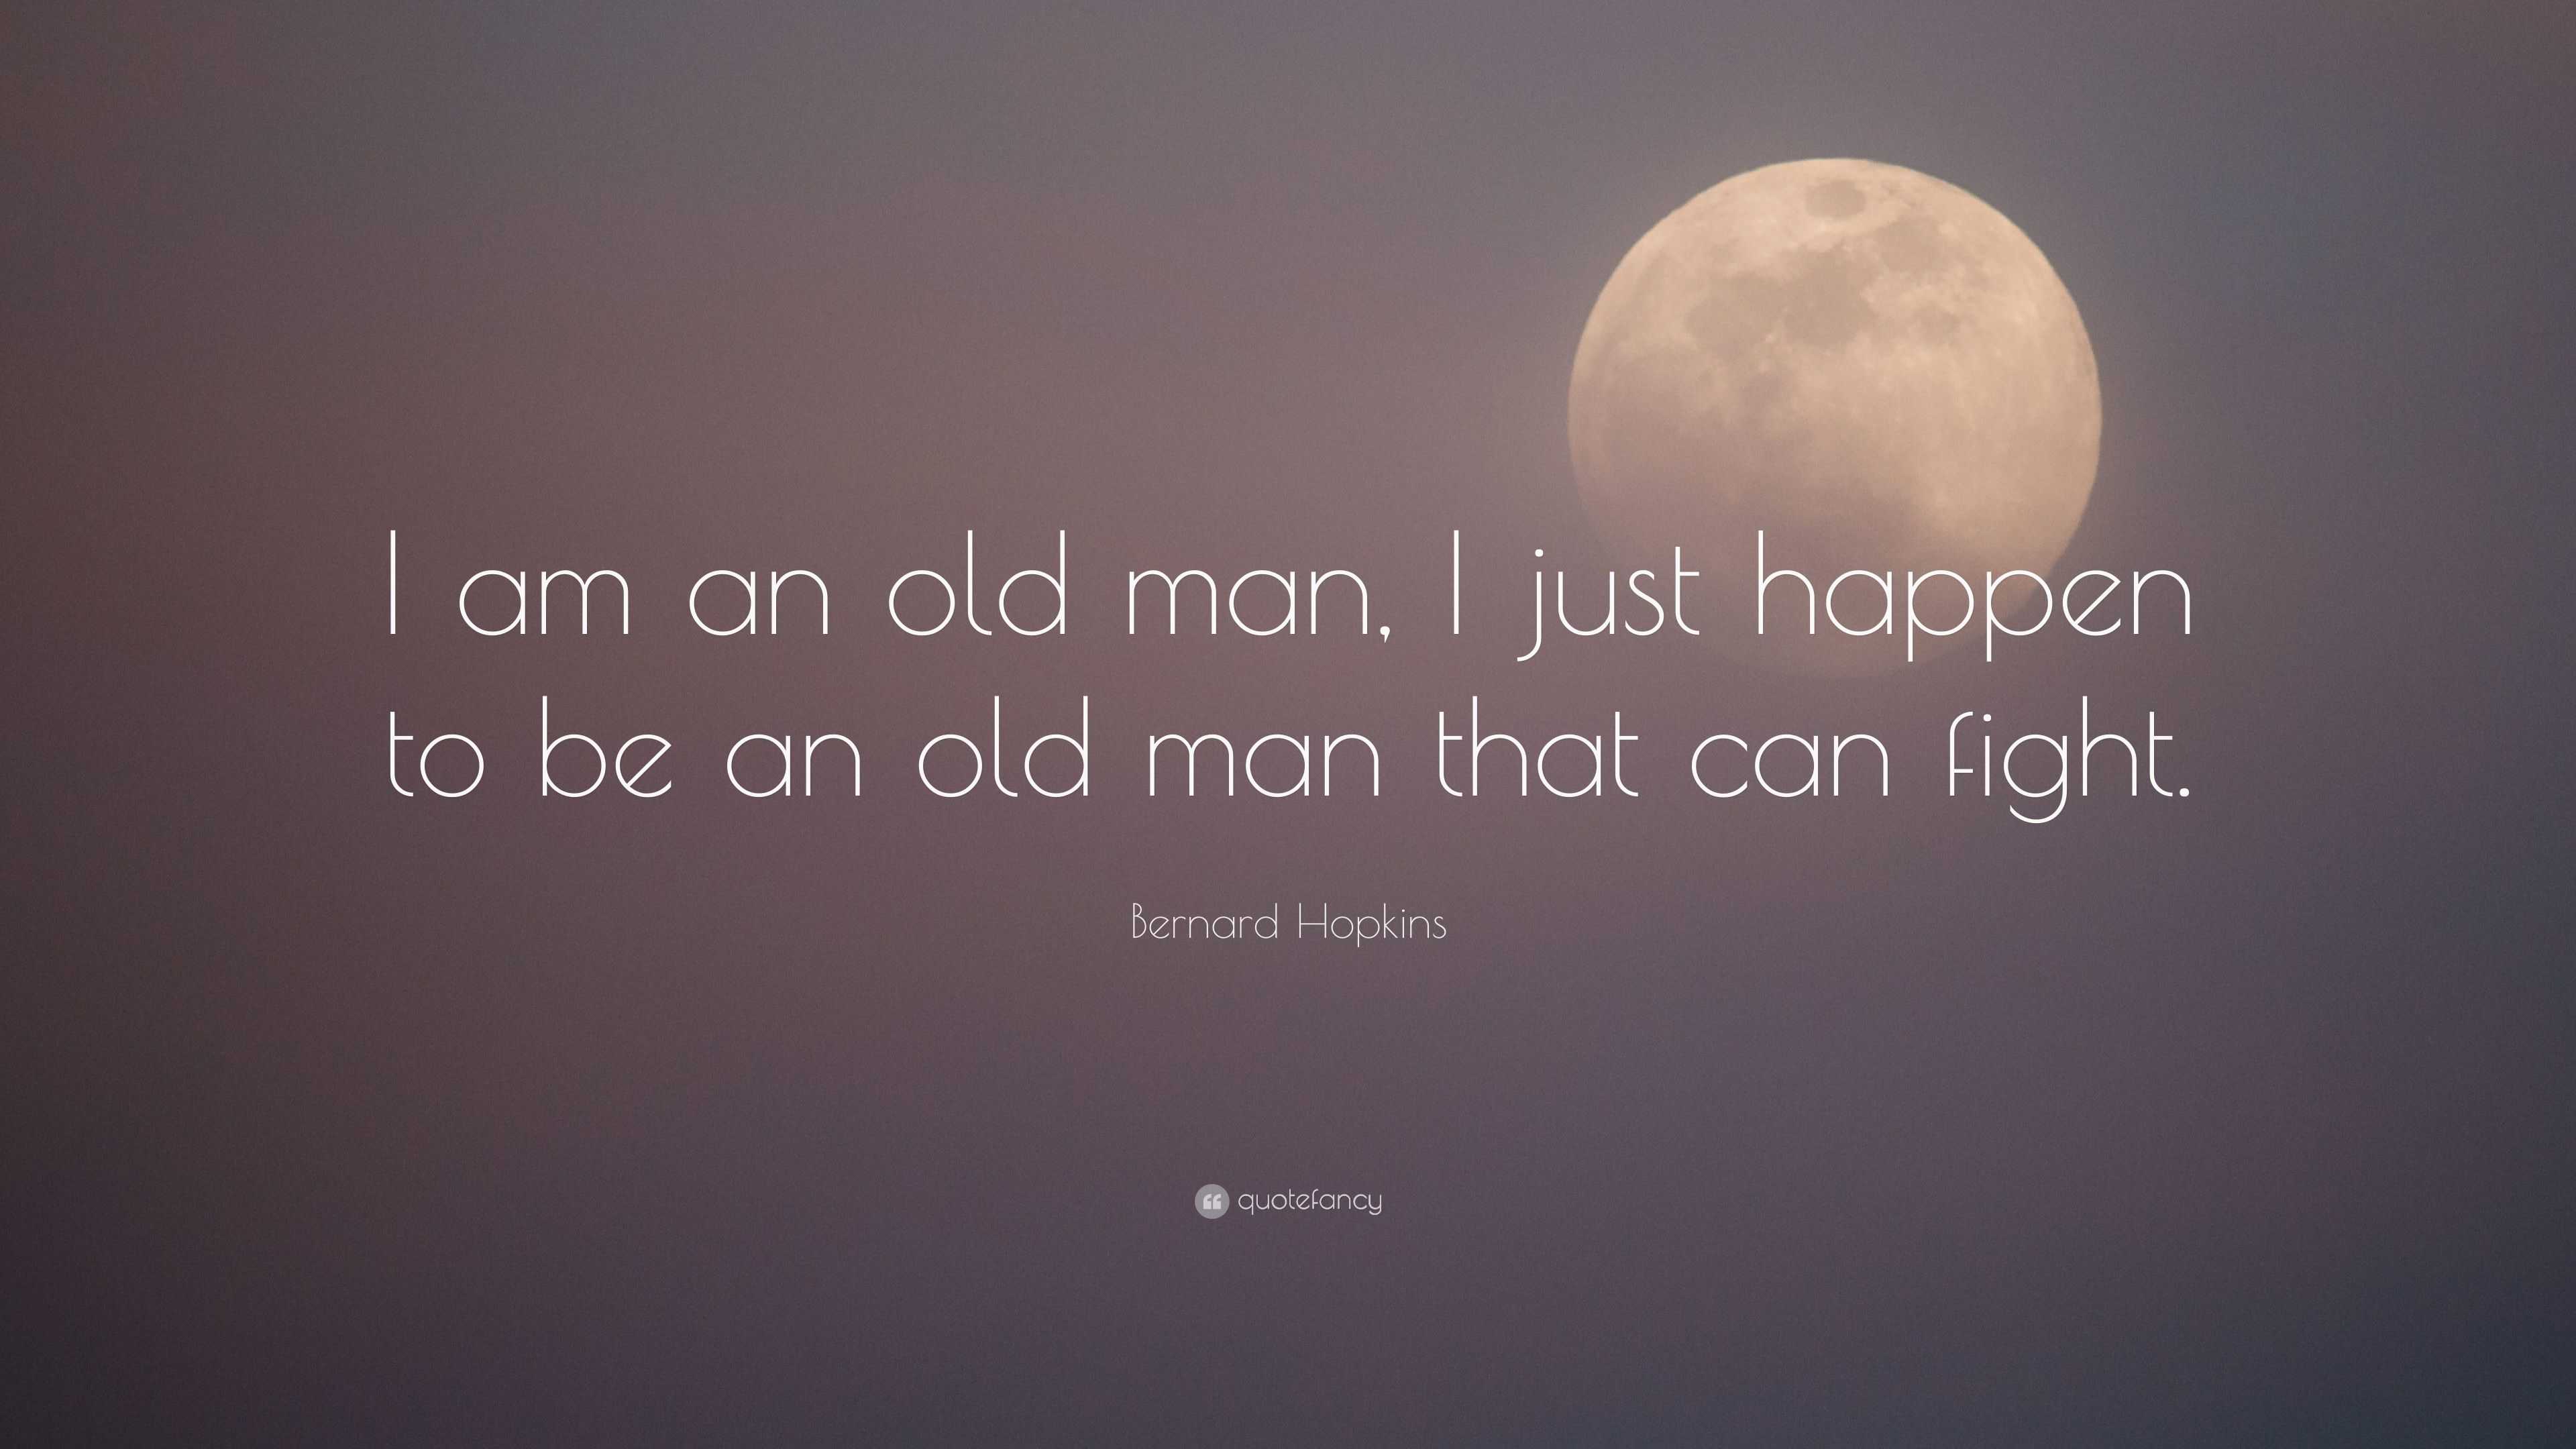 Bernard Hopkins Quote: “I am an old man, I just happen to be an old man